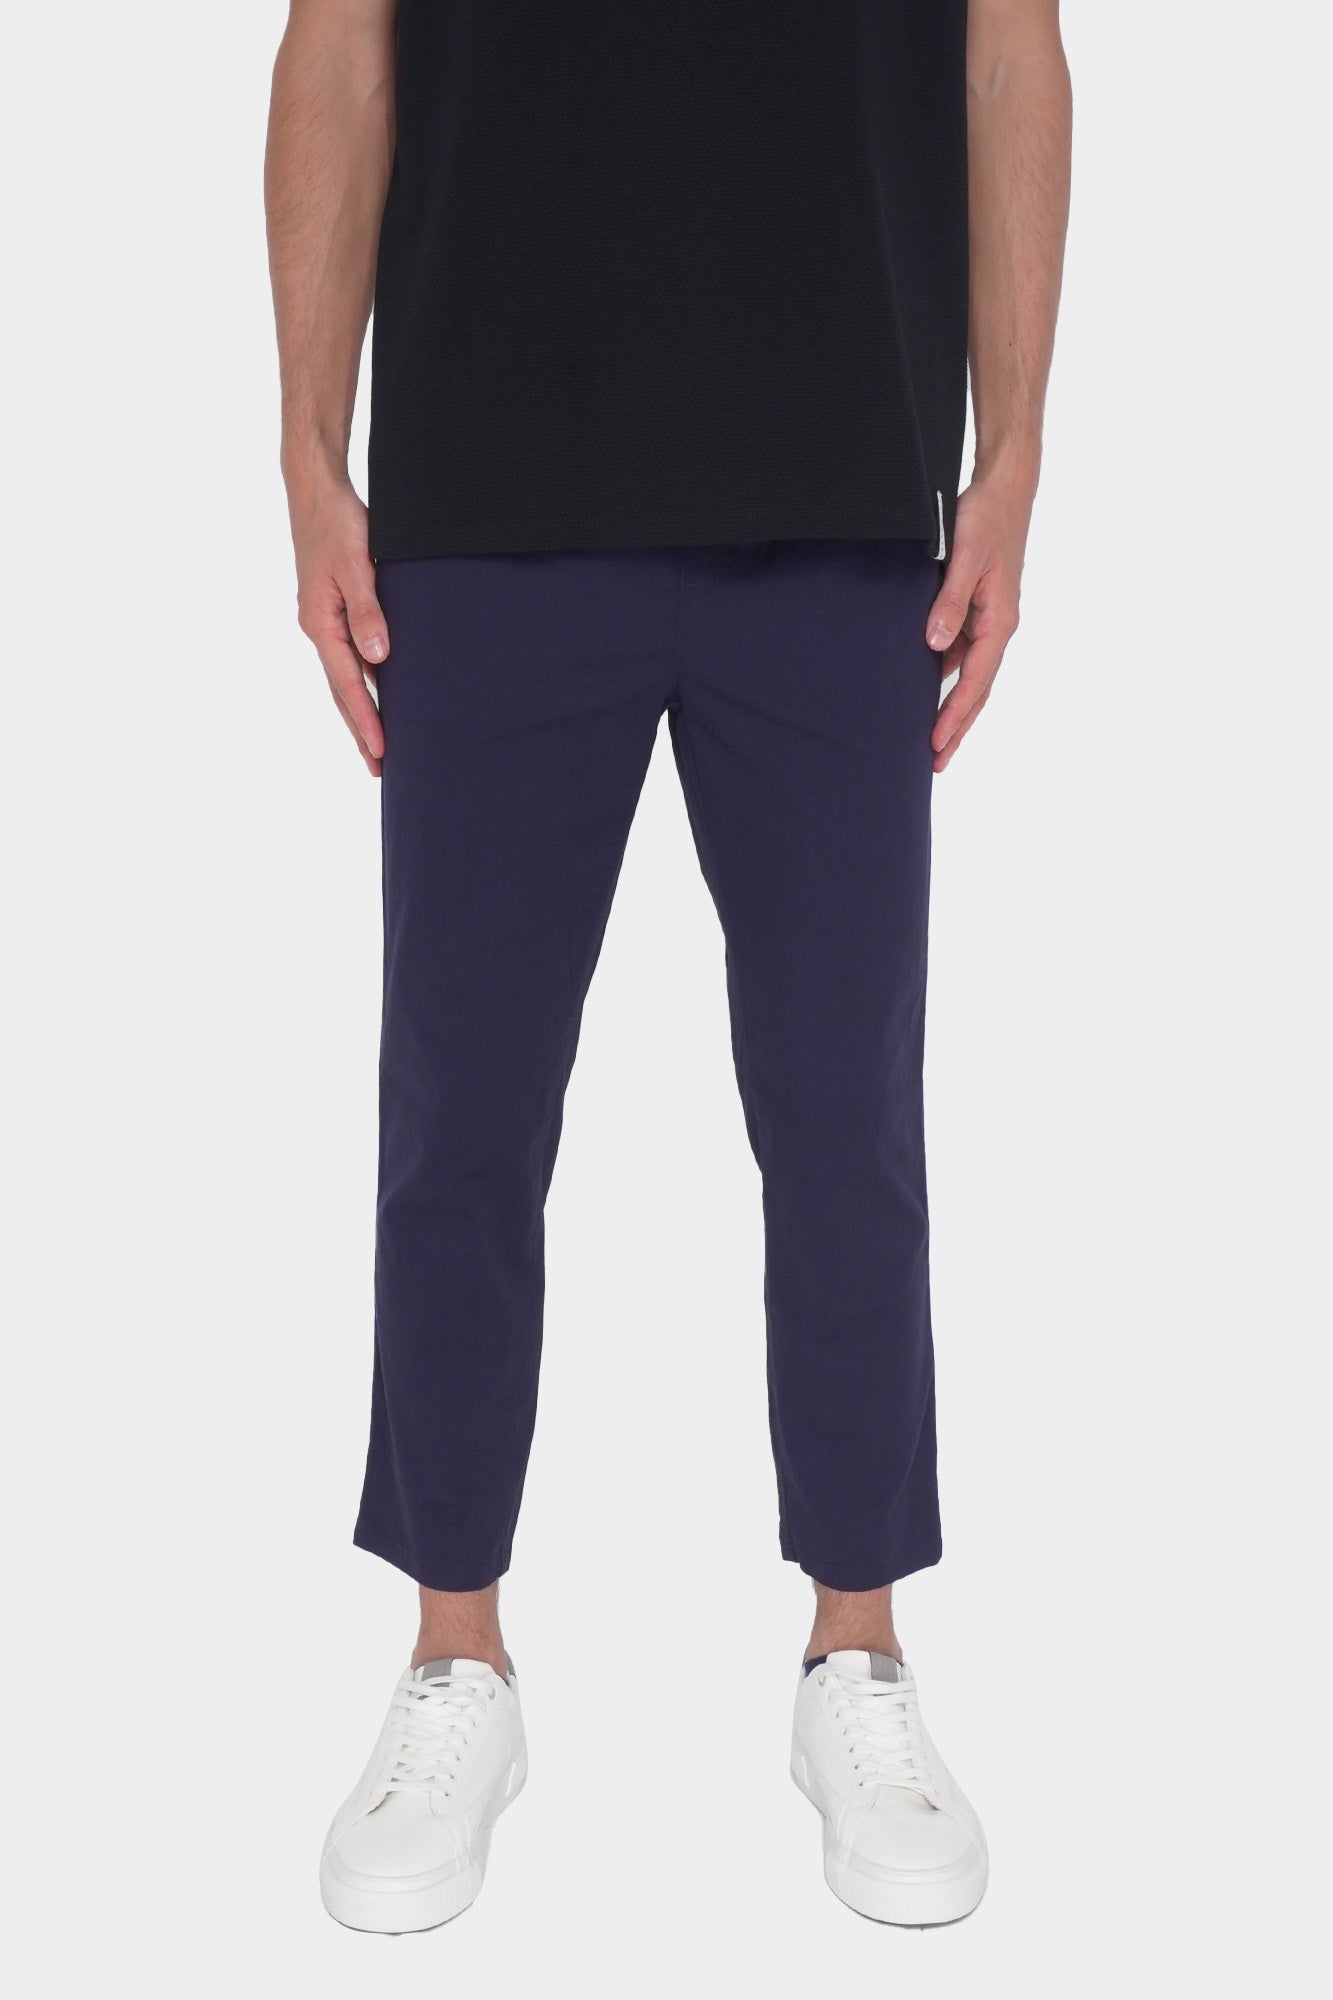 Basic Dapper Fit Ankle Length Pull-On Trousers – PENSHOPPE